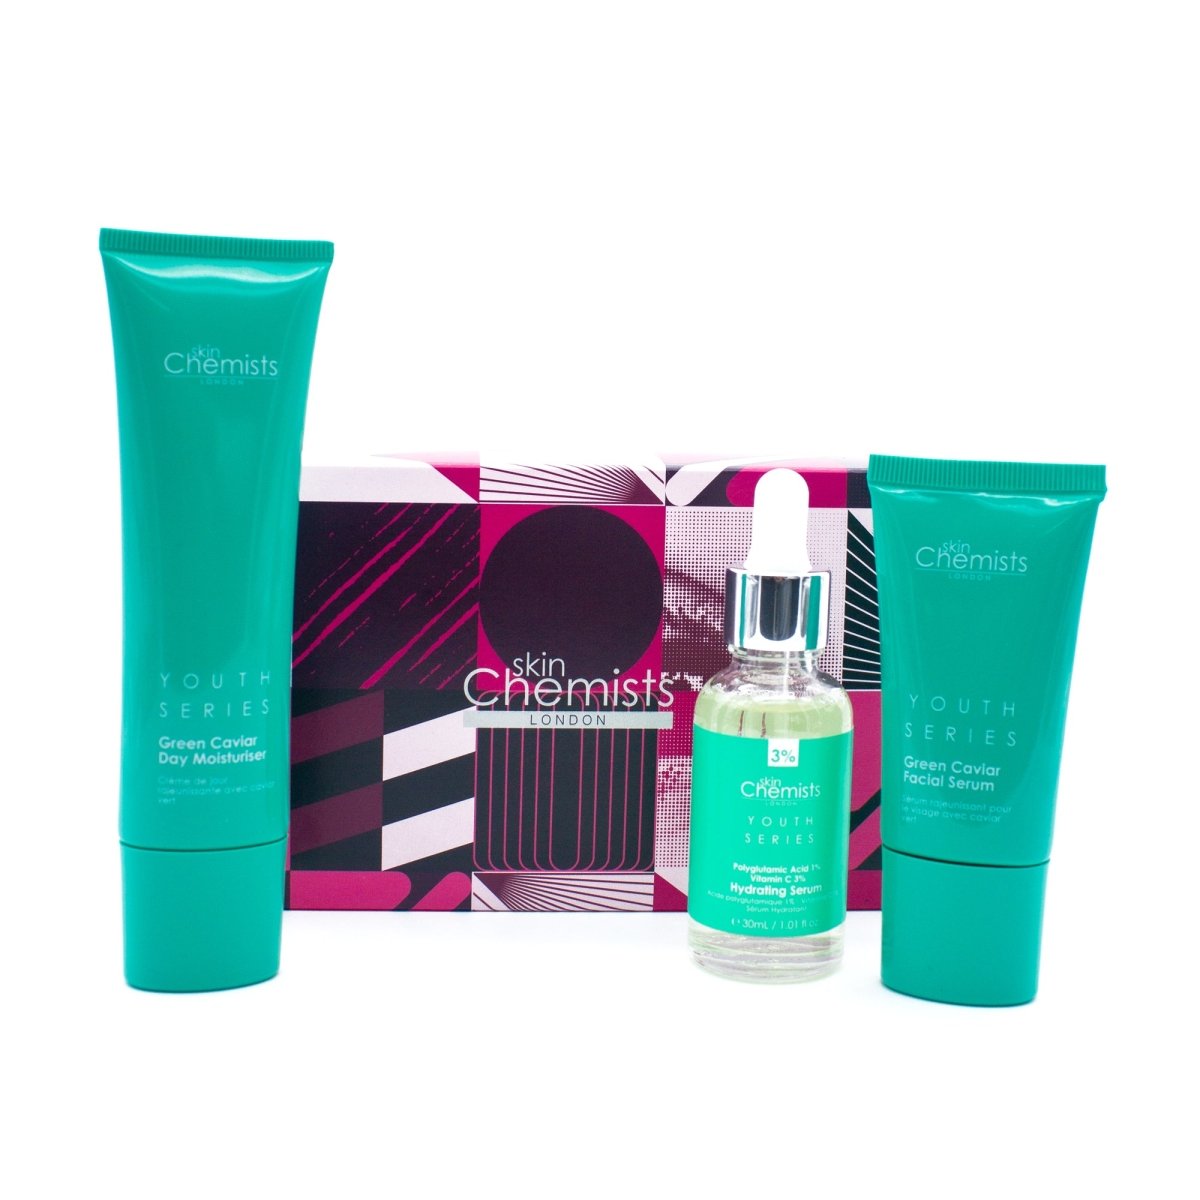 Youth Series Green Caviar Hydrating Gift Set - skinChemists